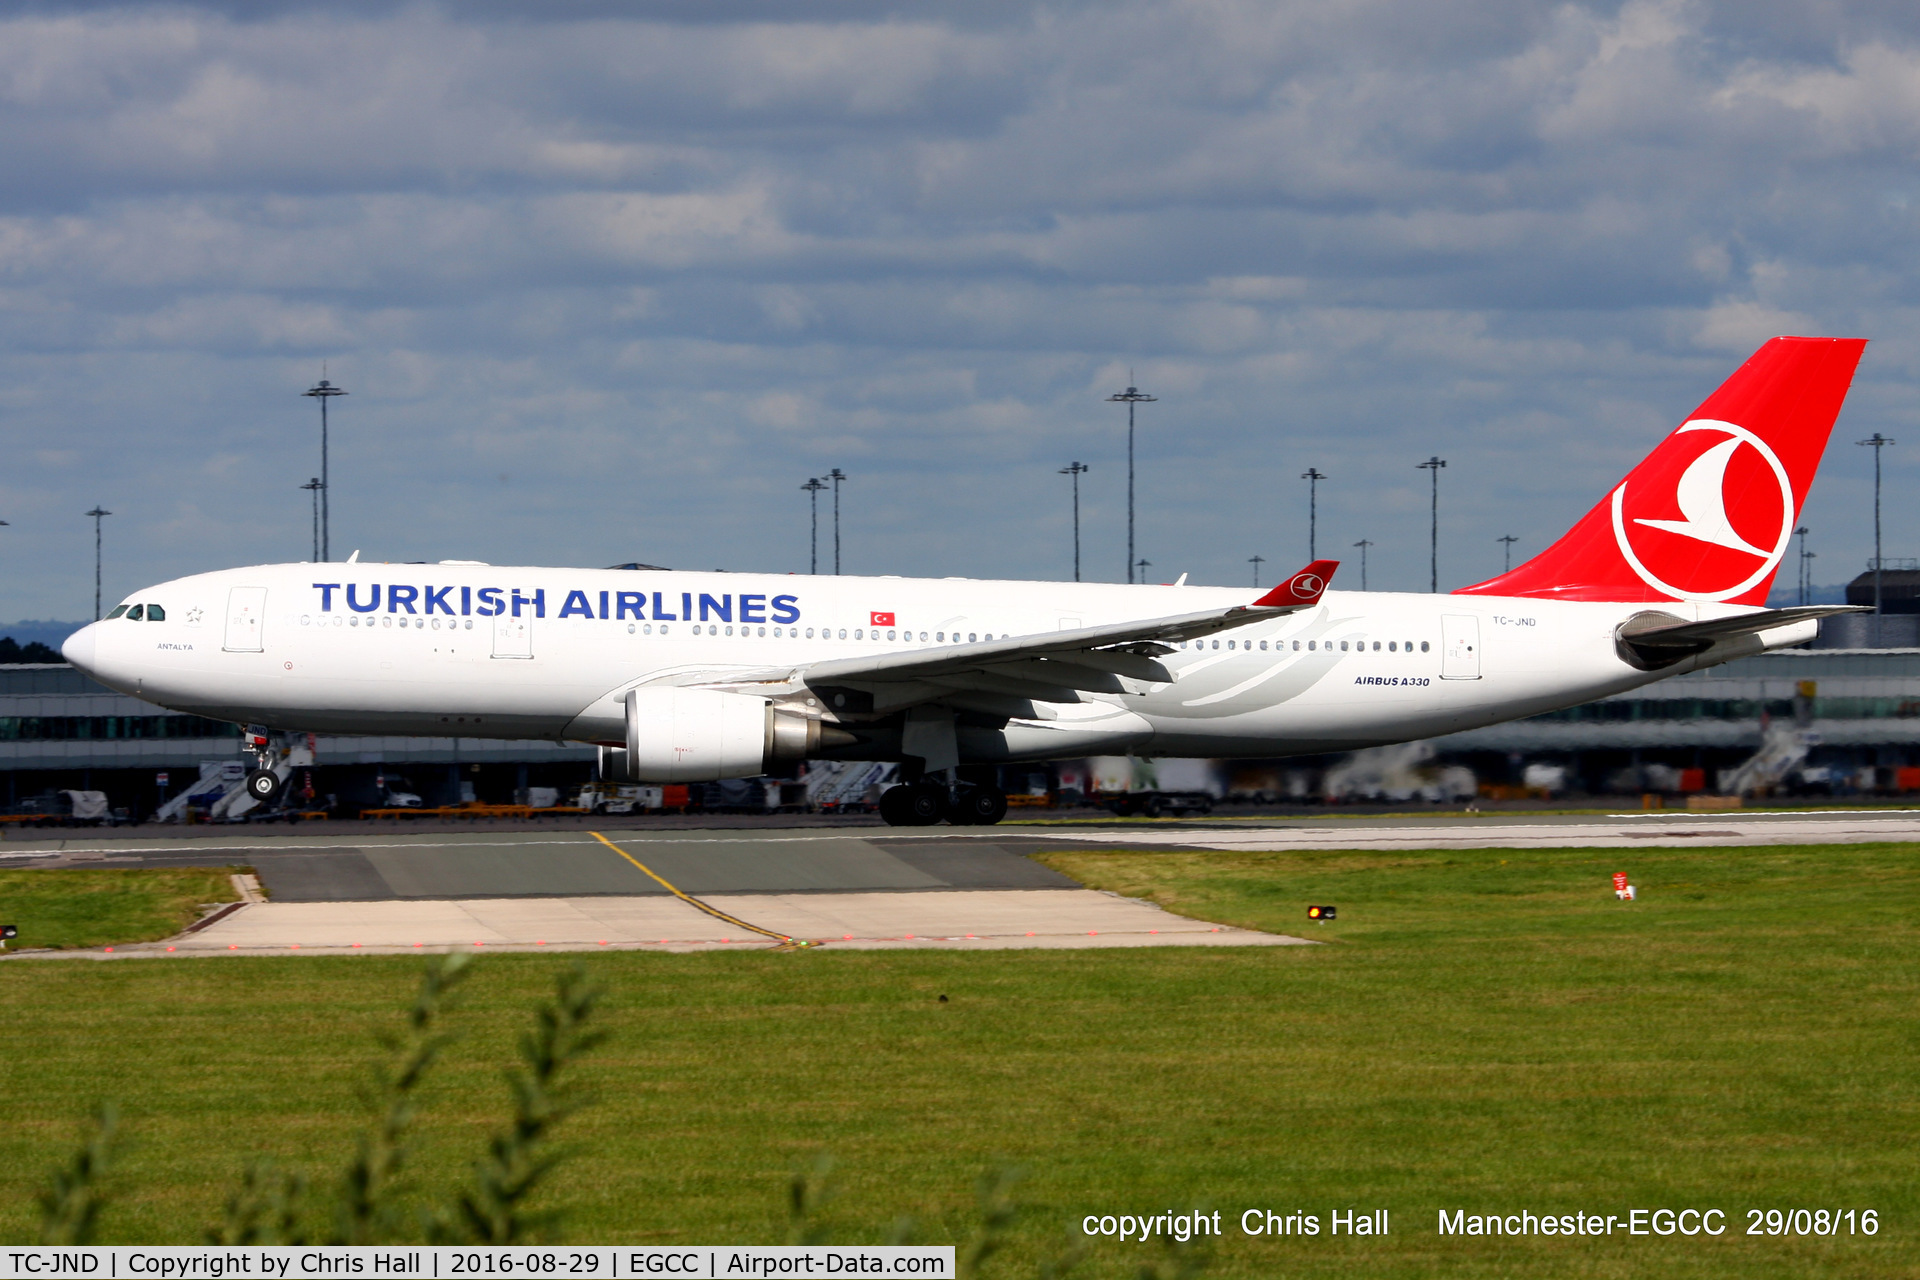 TC-JND, 2006 Airbus A330-203 C/N 754, Turkish Airlines